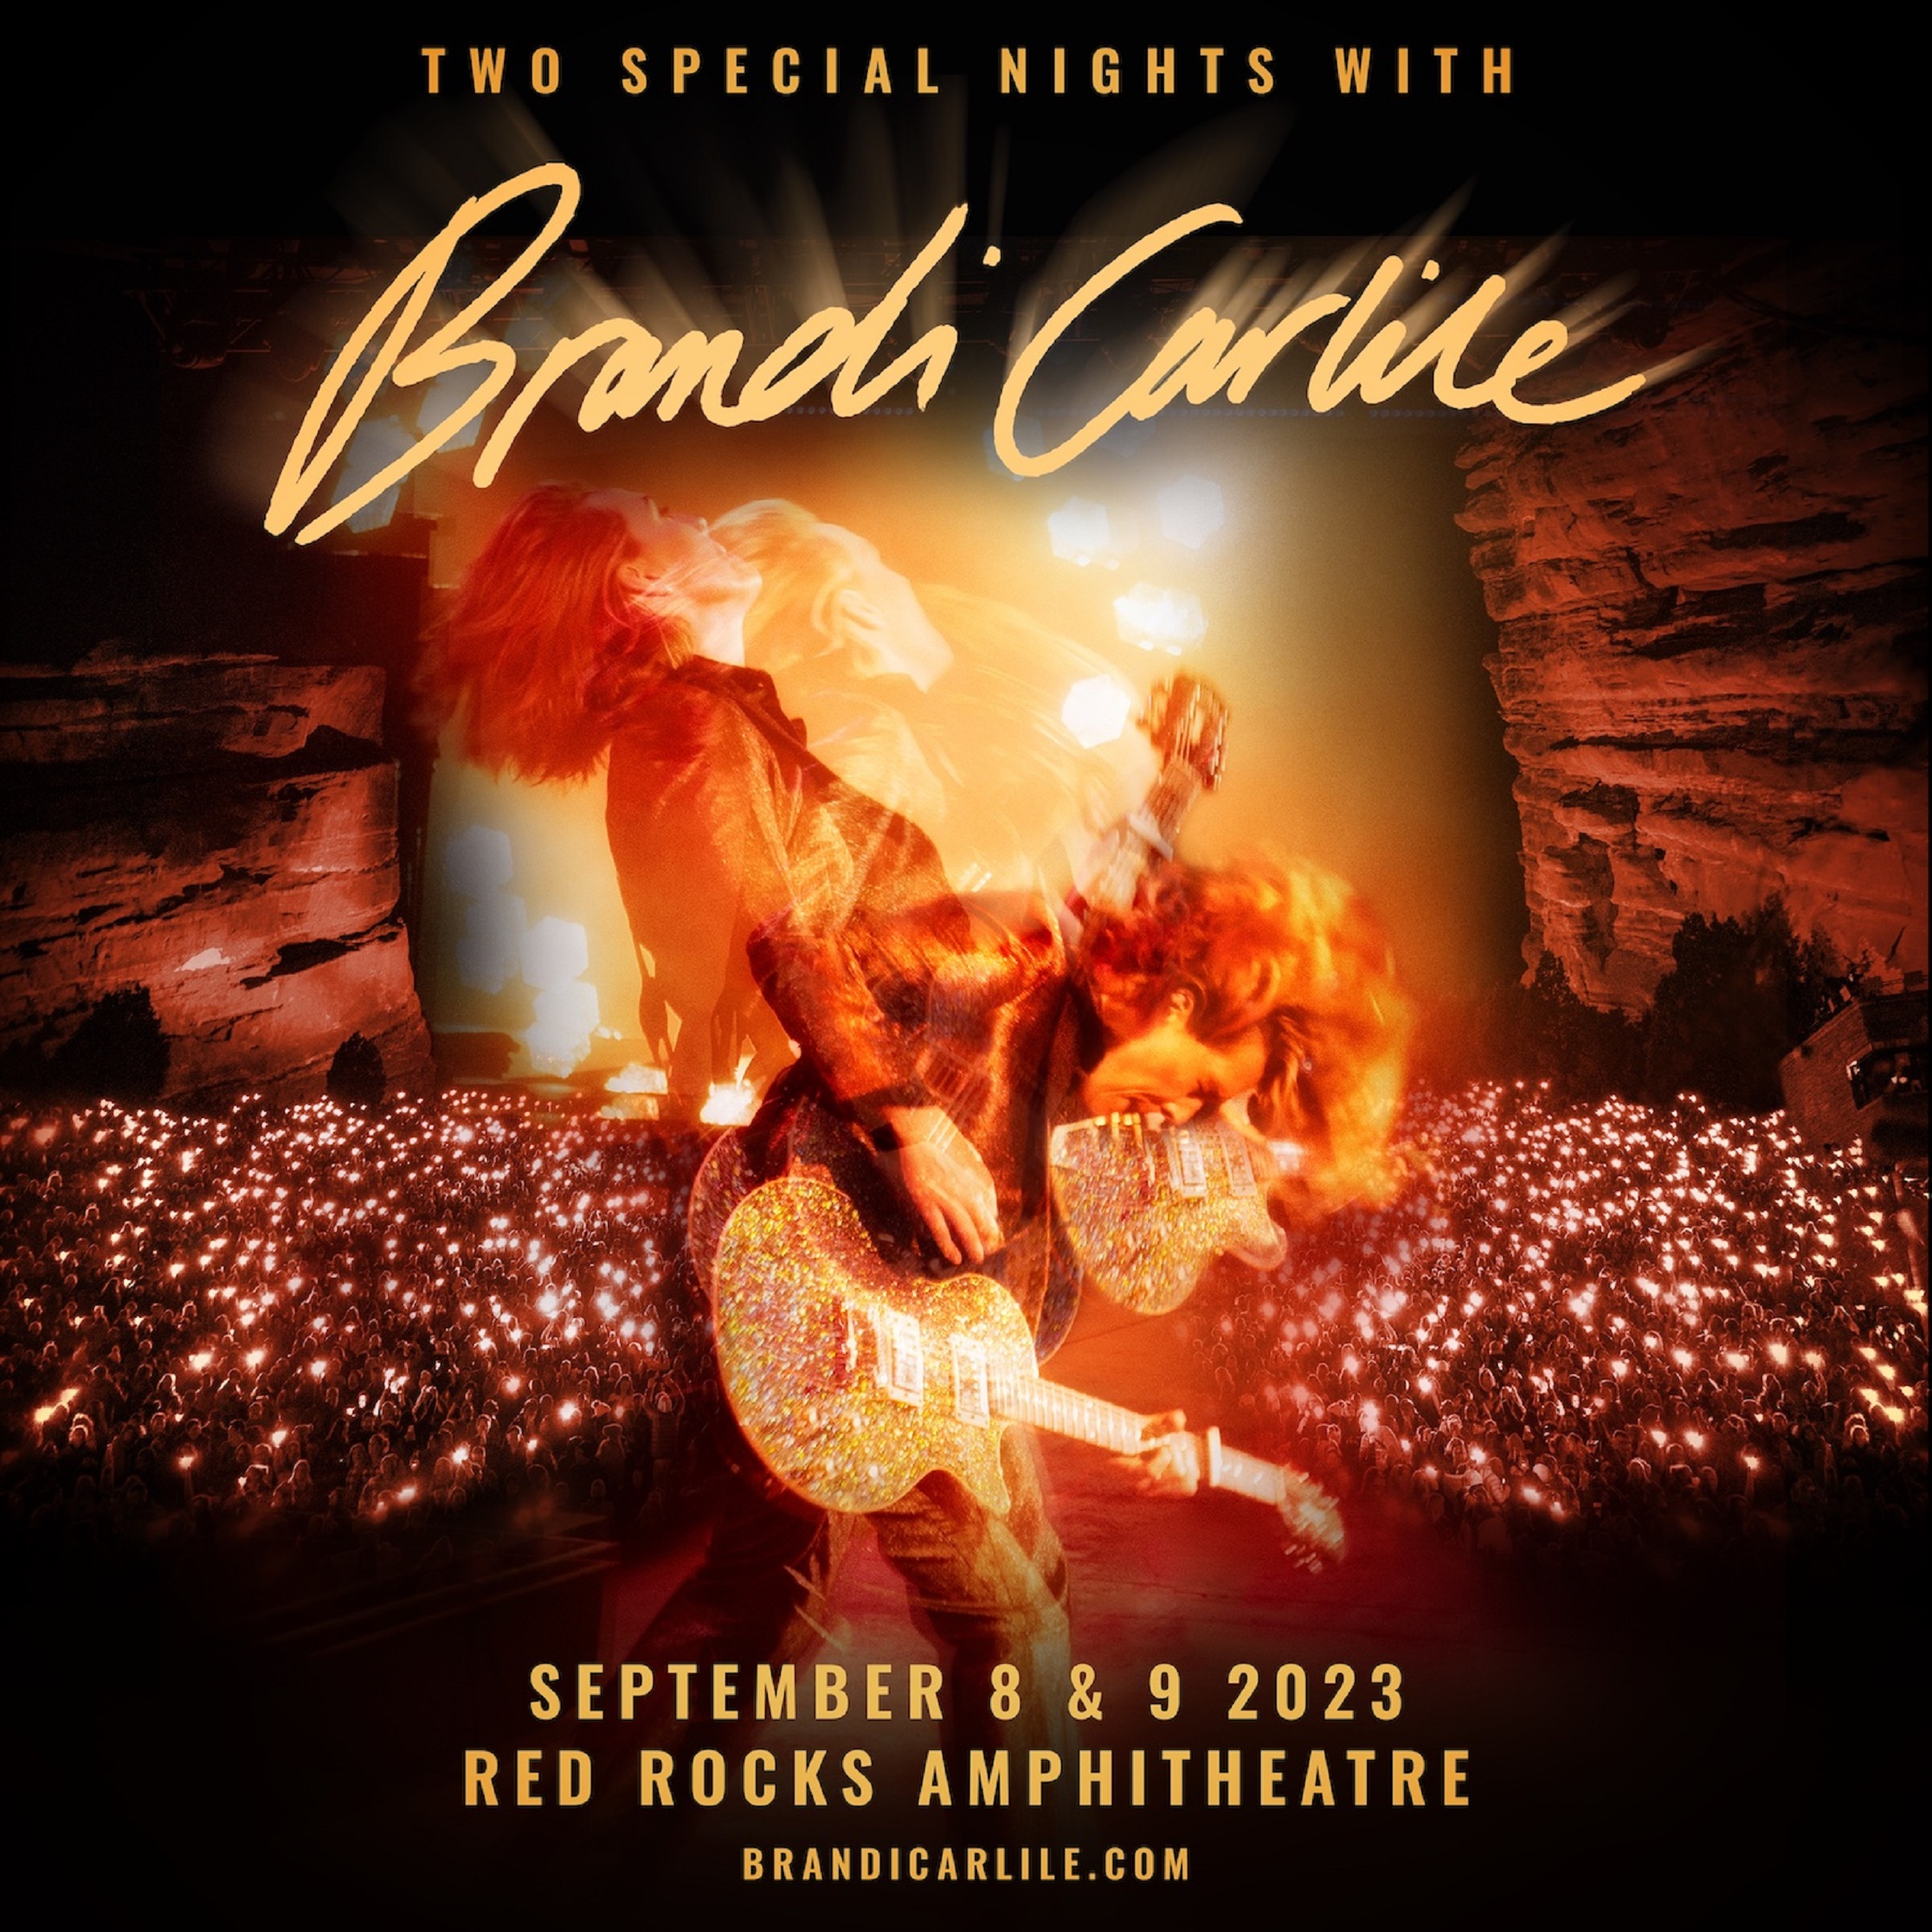 BRANDI CARLILE CONFIRMS TWO NIGHTS AT RED ROCKS AMPHITHEATRE ON SEPTEMBER 8 & 9